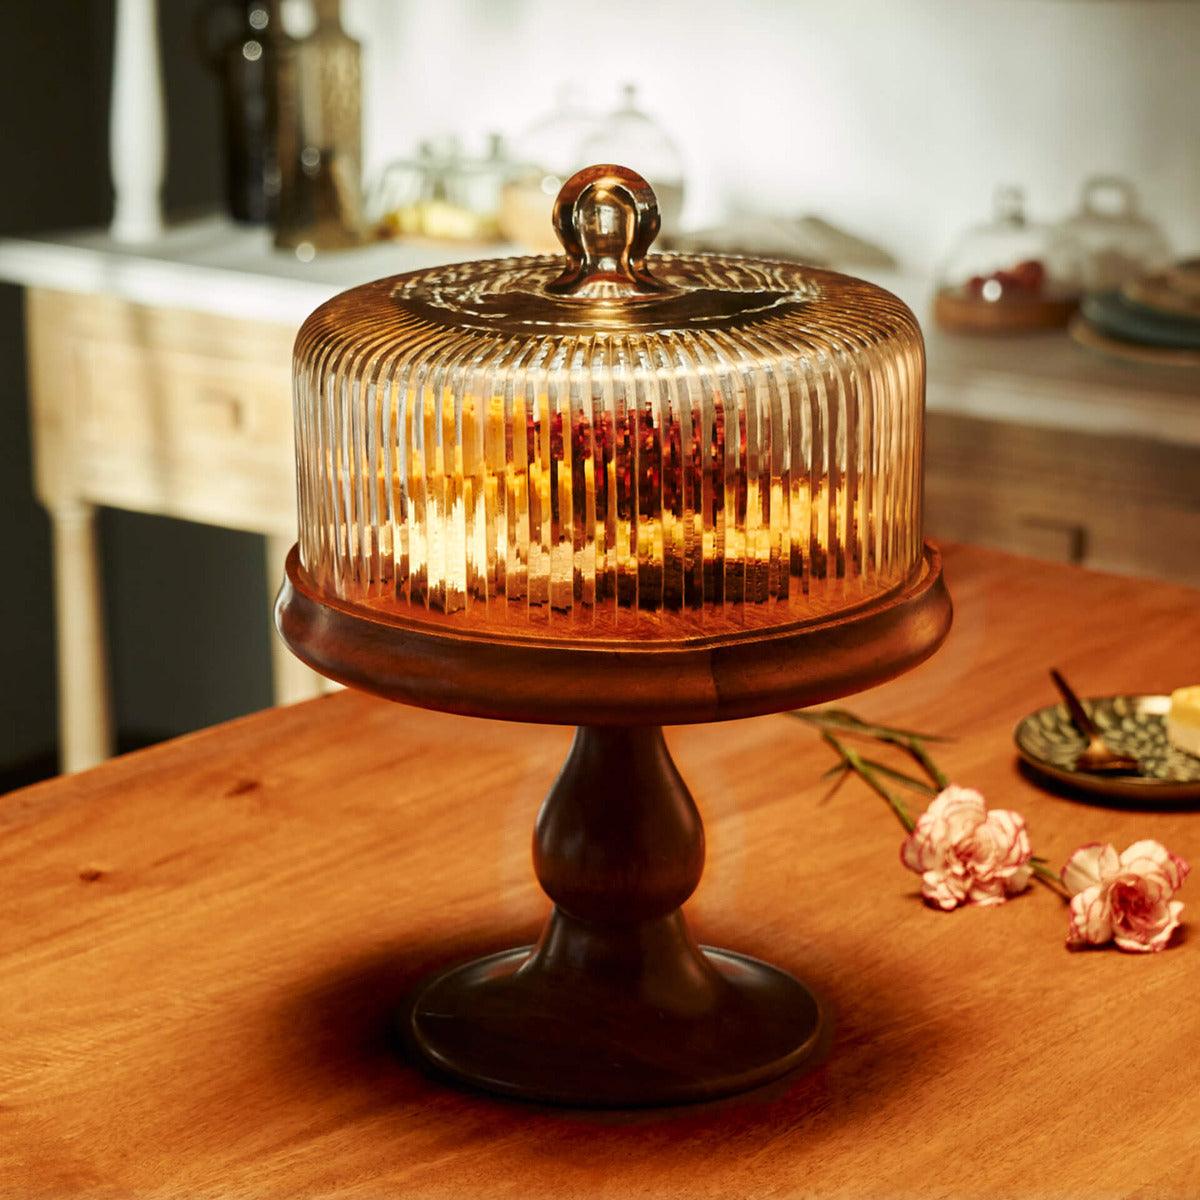 fluted glass cloche with wooden stand